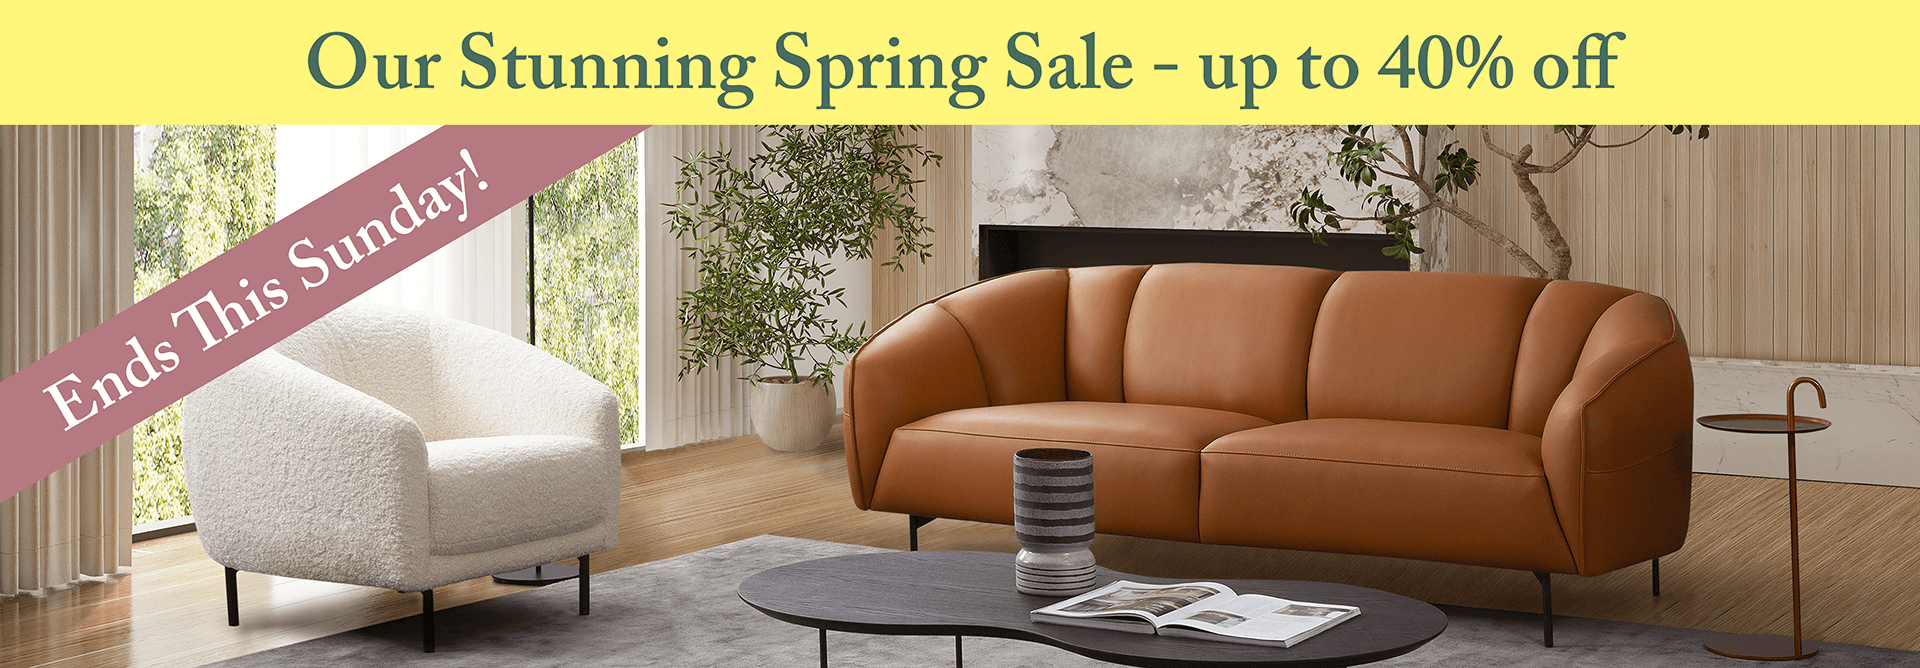 Our Stunning Spring Sale - Ends This Sunday